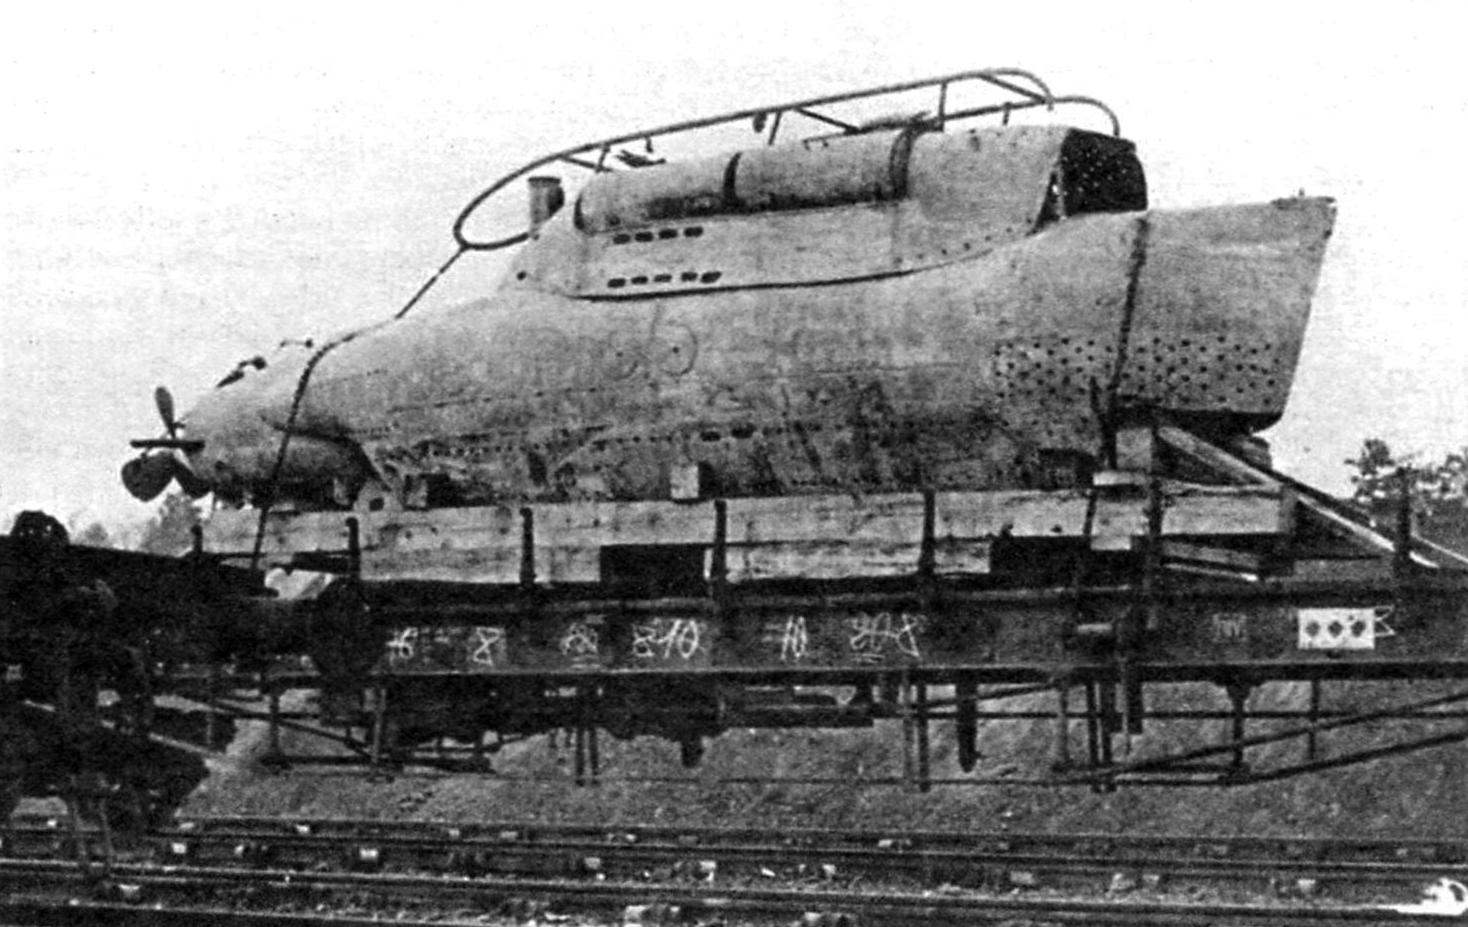 Submarine CA 2 on the train platform taken to Bordeaux, where she was mounted on a large boat carrier 